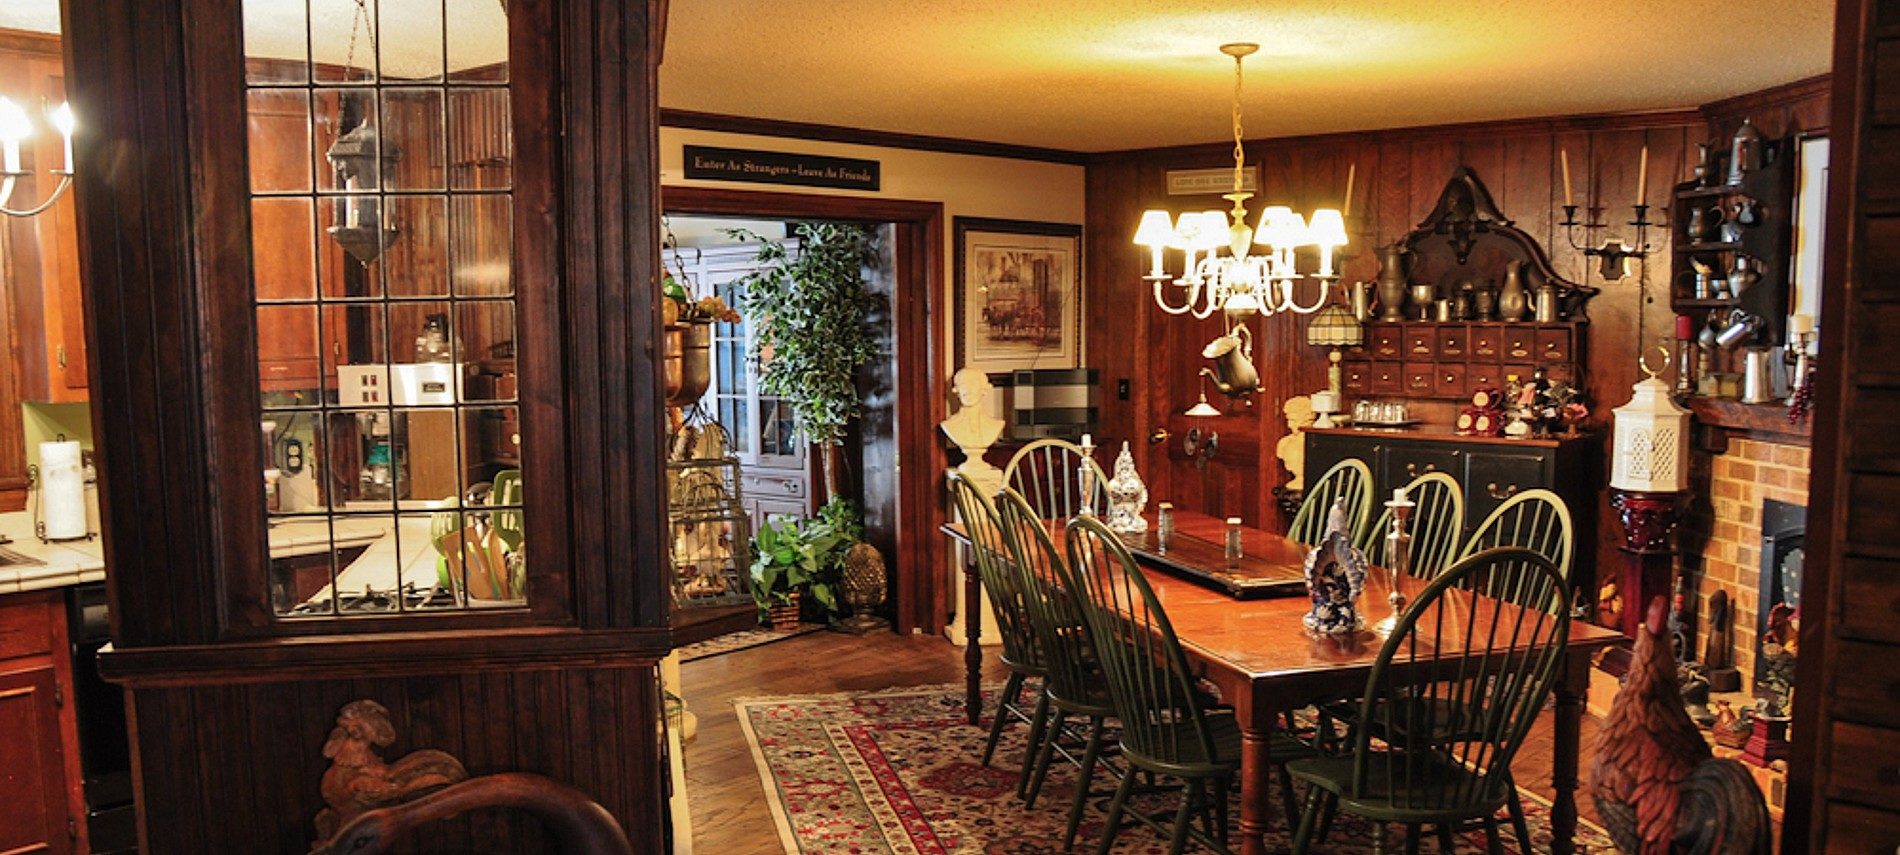 Kitchen and dining room area of a historic home with table and eight chairs and antique decor